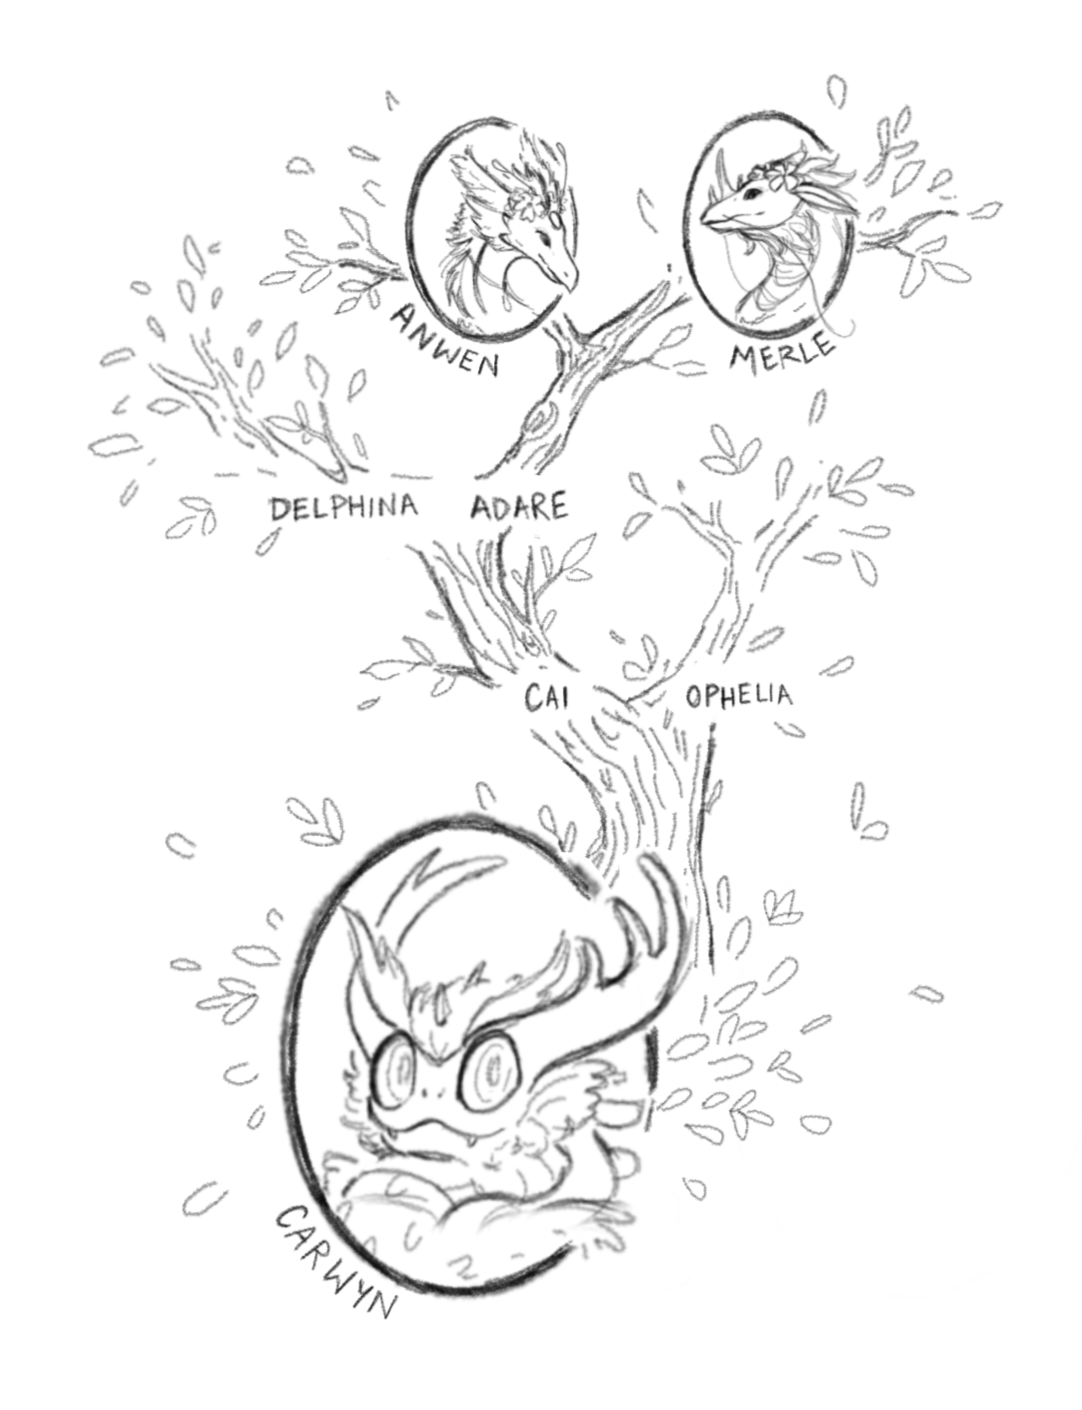 A pencil sketch family tree showing four generations. The tree starts with Anwen and Merle, their child Adare and mate Delphina, grandchild Cai and mate Ophelia, and finally great-grandchild Carwyn.